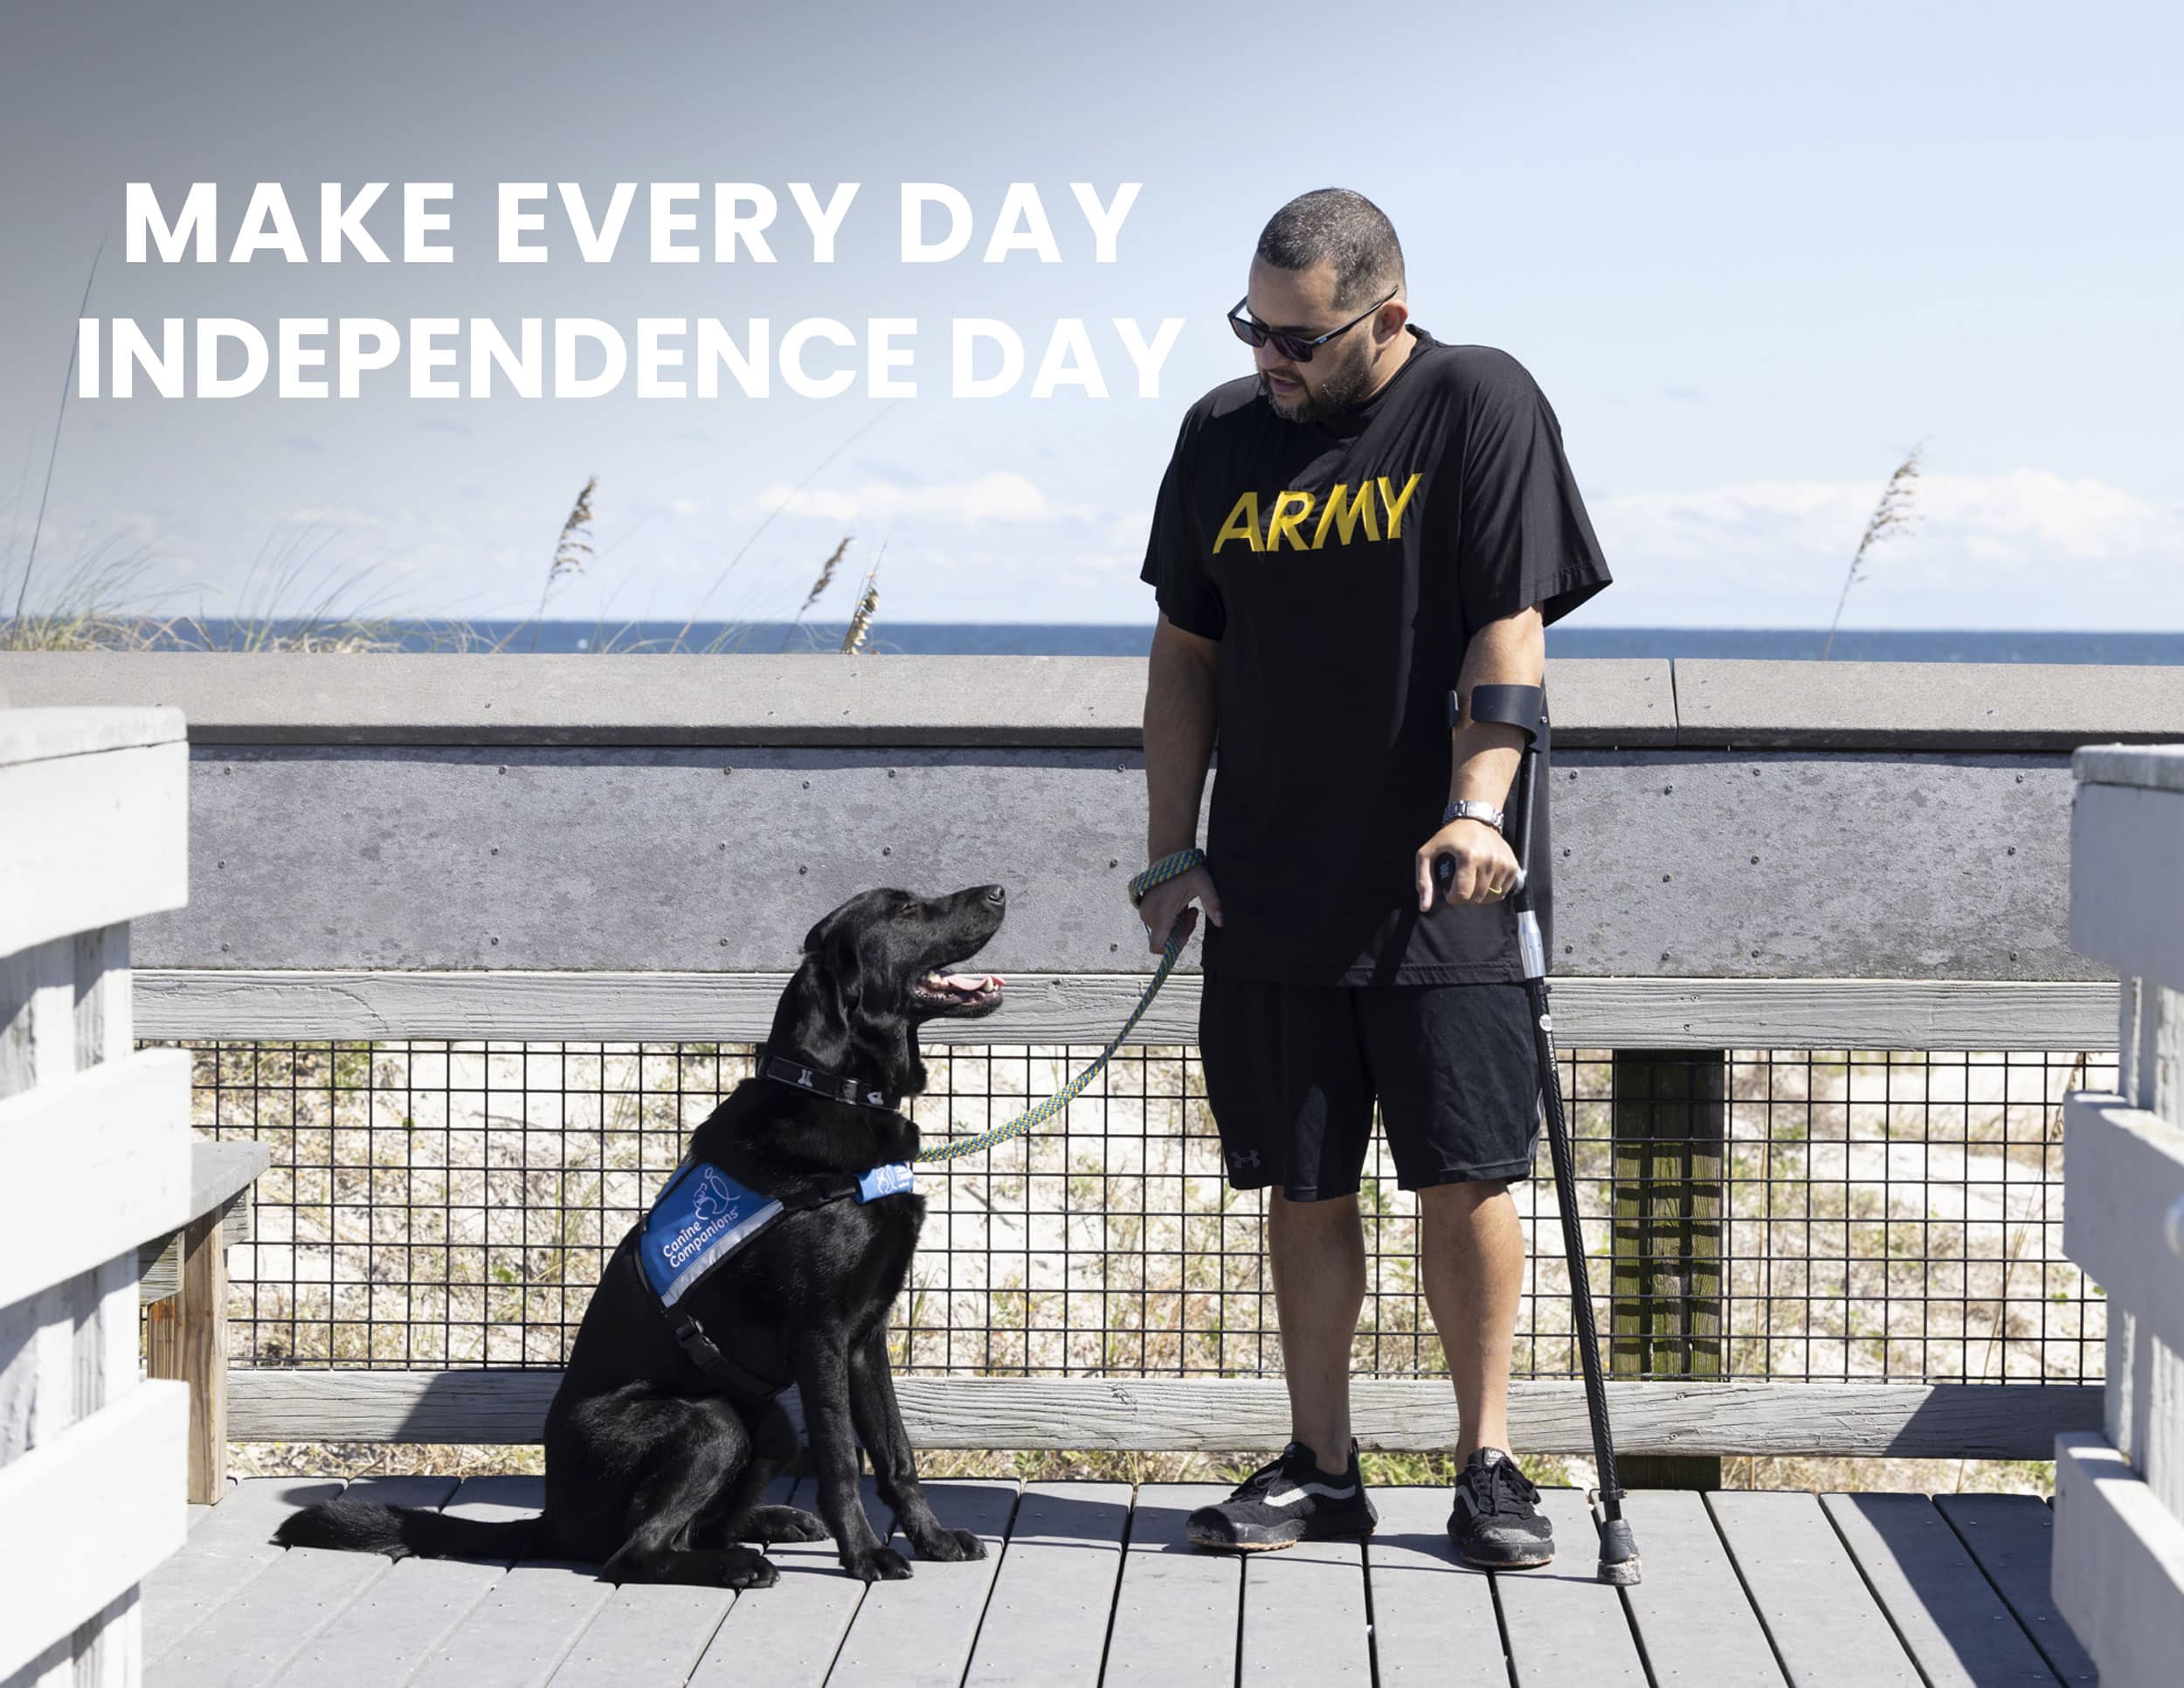 A man wearing an 'ARMY' T-shirt stands with his black service dog on a boardwalk by the beach. The text above them reads 'MAKE EVERY DAY INDEPENDENCE DAY' with the Canine Companions logo at the bottom.